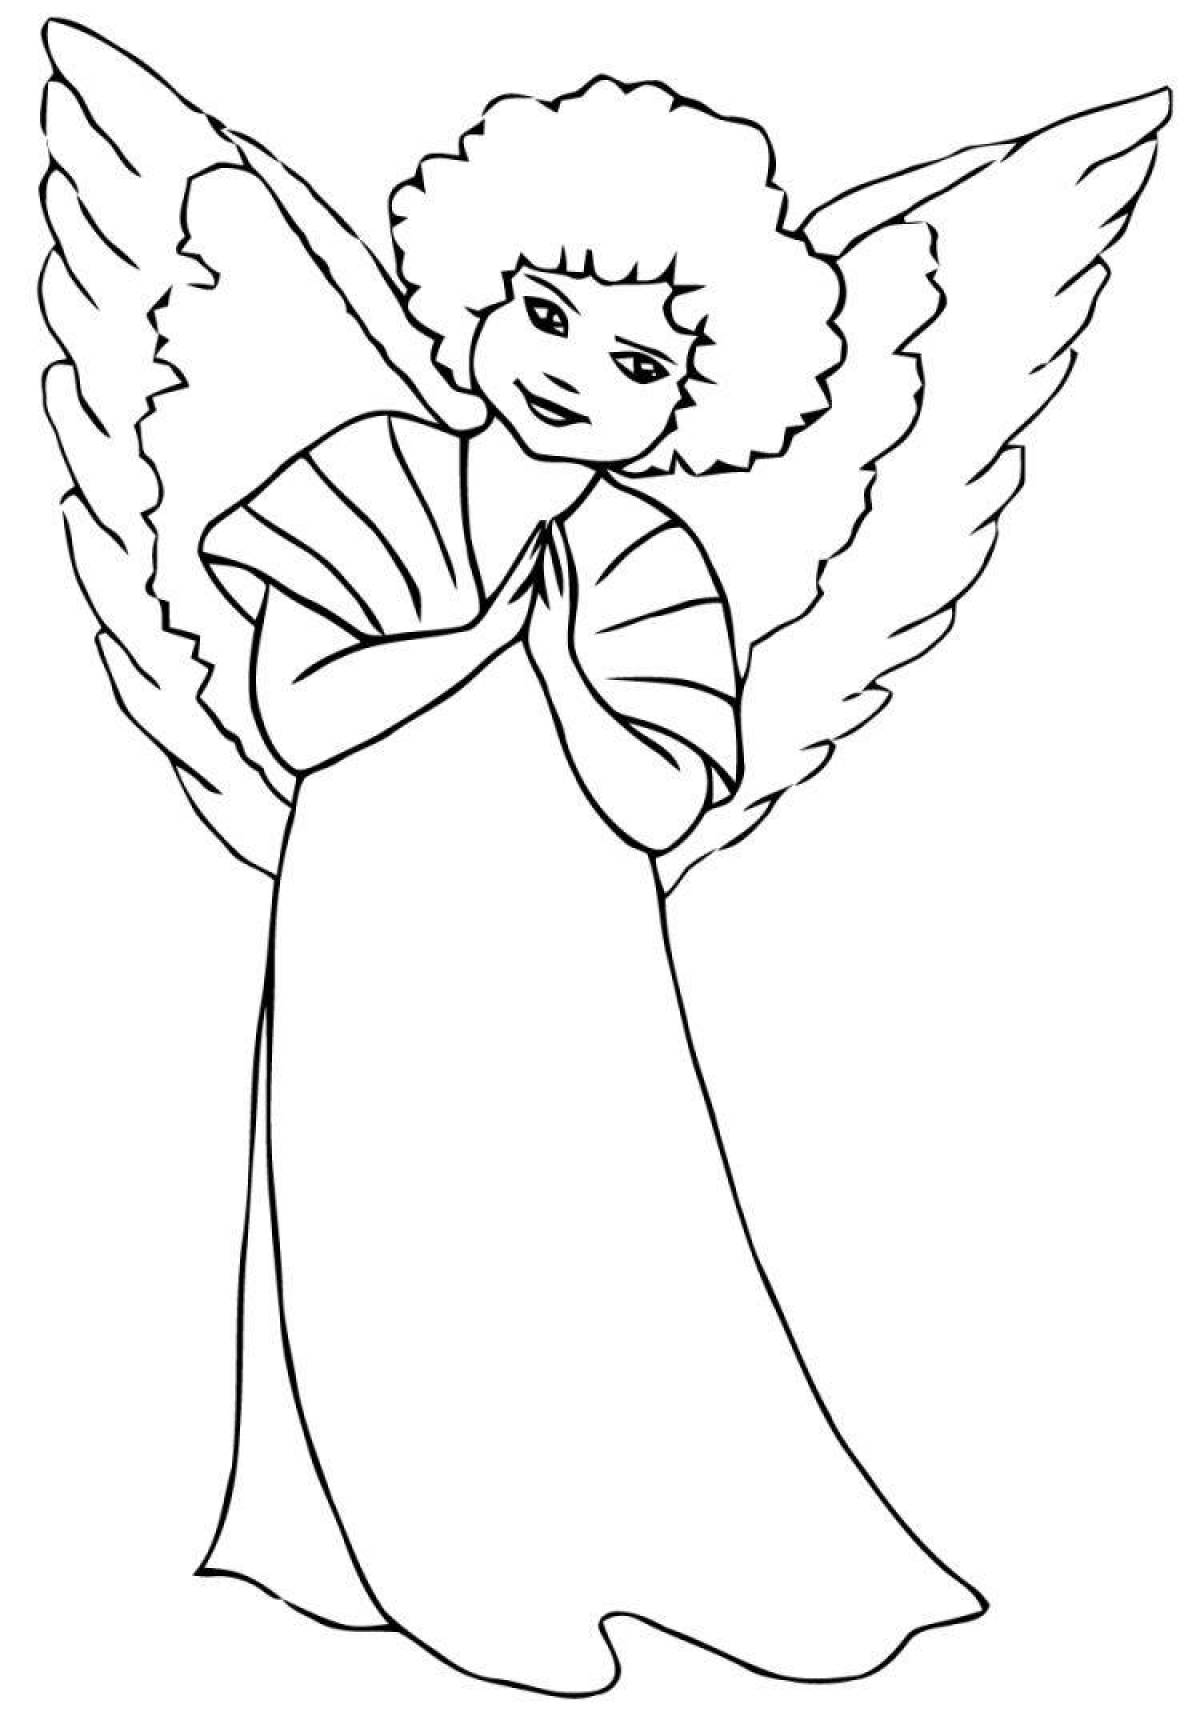 Exquisite Christmas angel coloring book